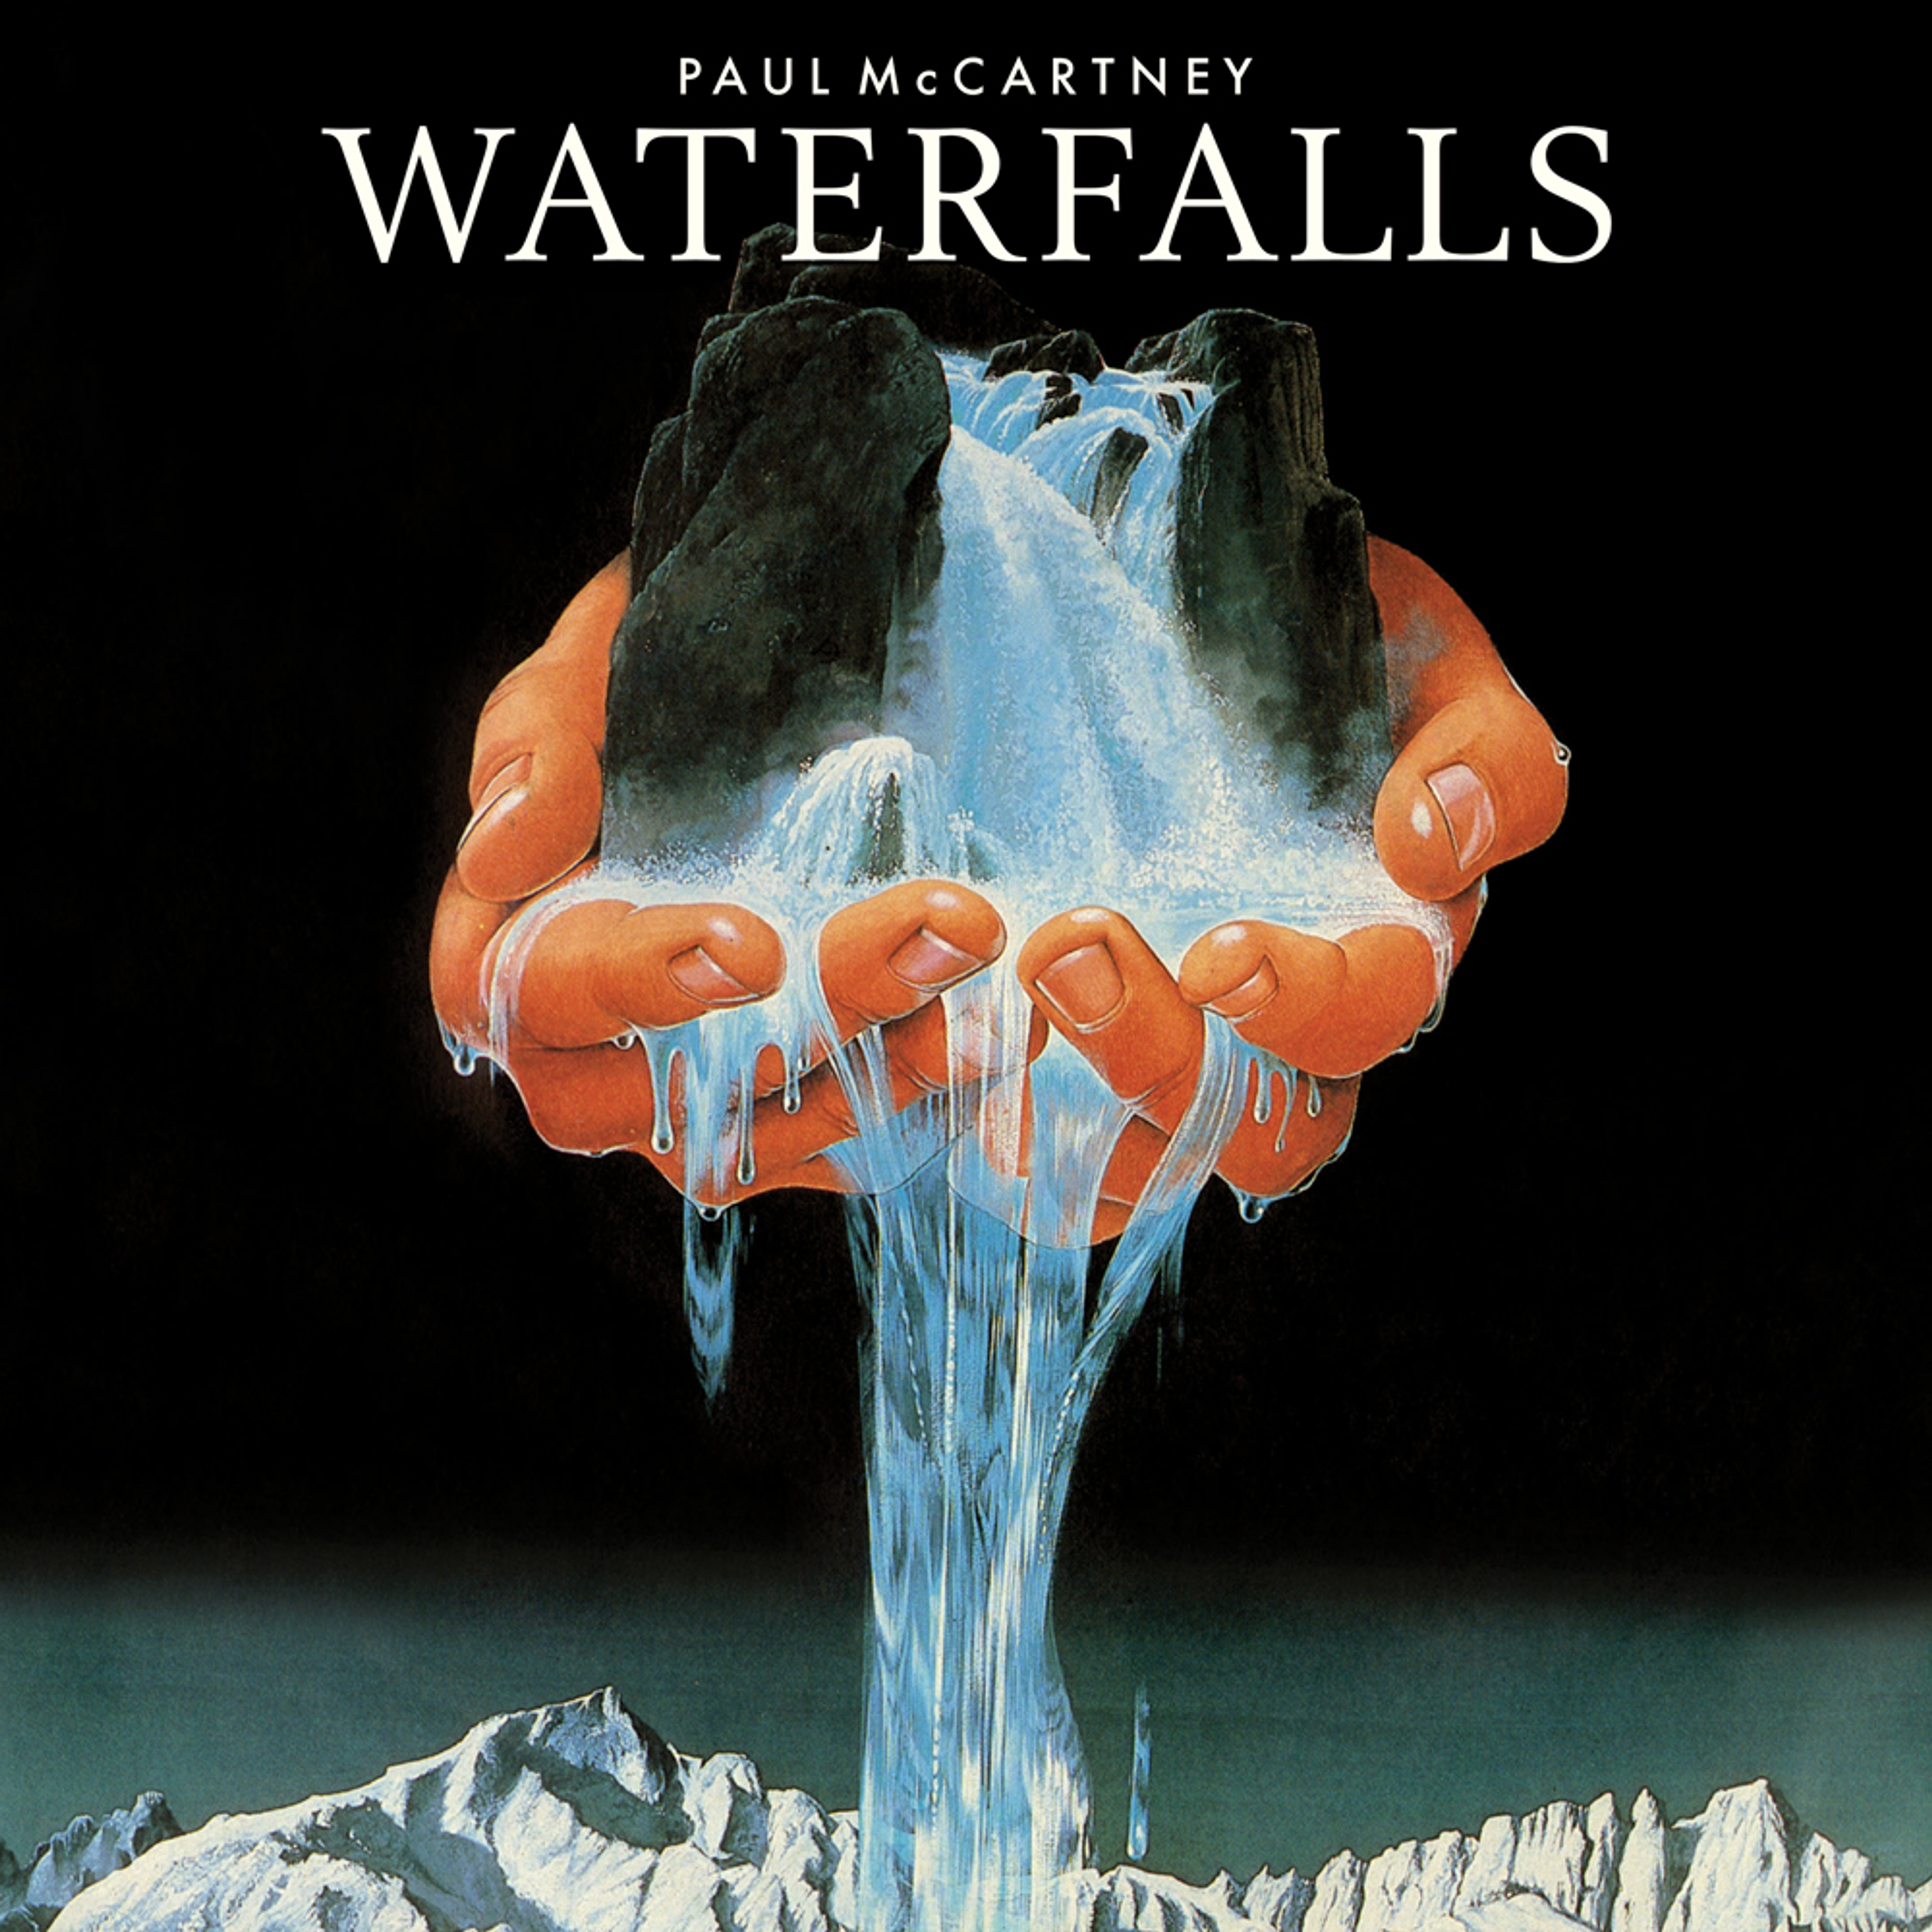 “Waterfalls” Single artwork as featured in 'The 7" Singles Box'